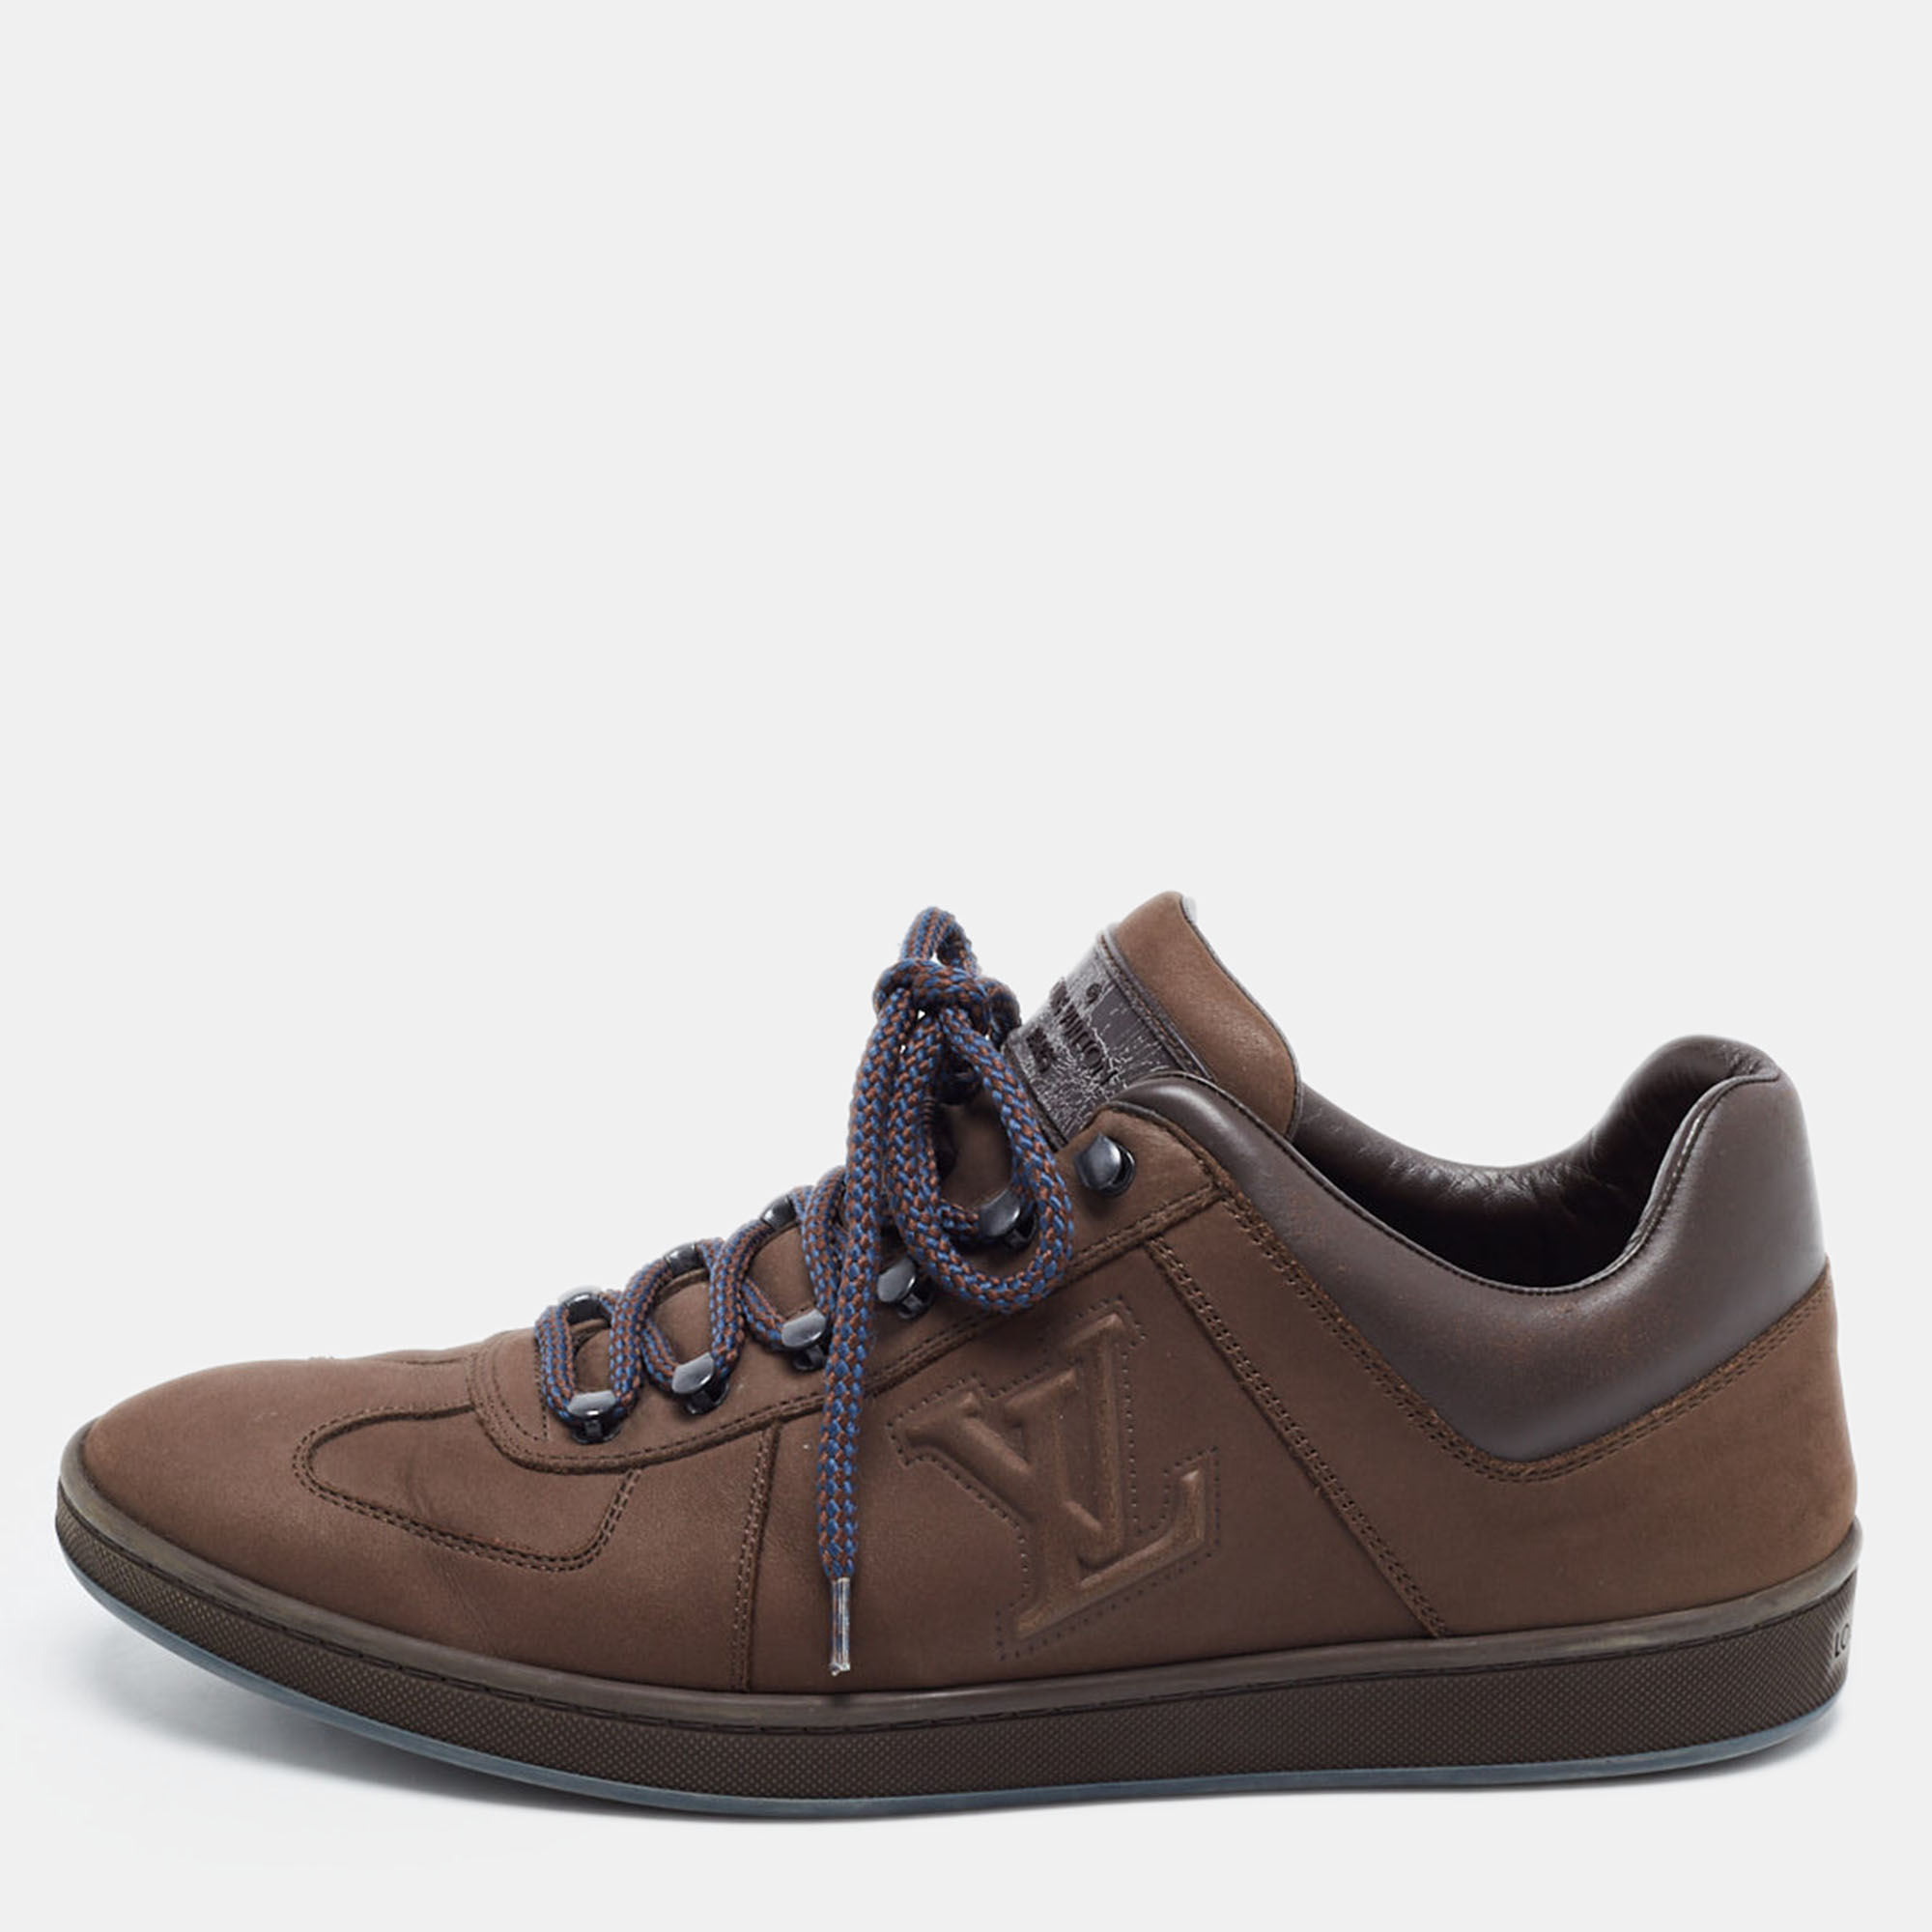 Sneakers like these are the perfect way to experience luxury and comfort. Crafted from quality material these Louis Vuitton sneakers are made into a classic silhouette and are very sturdy. Pair them with your casual wear.